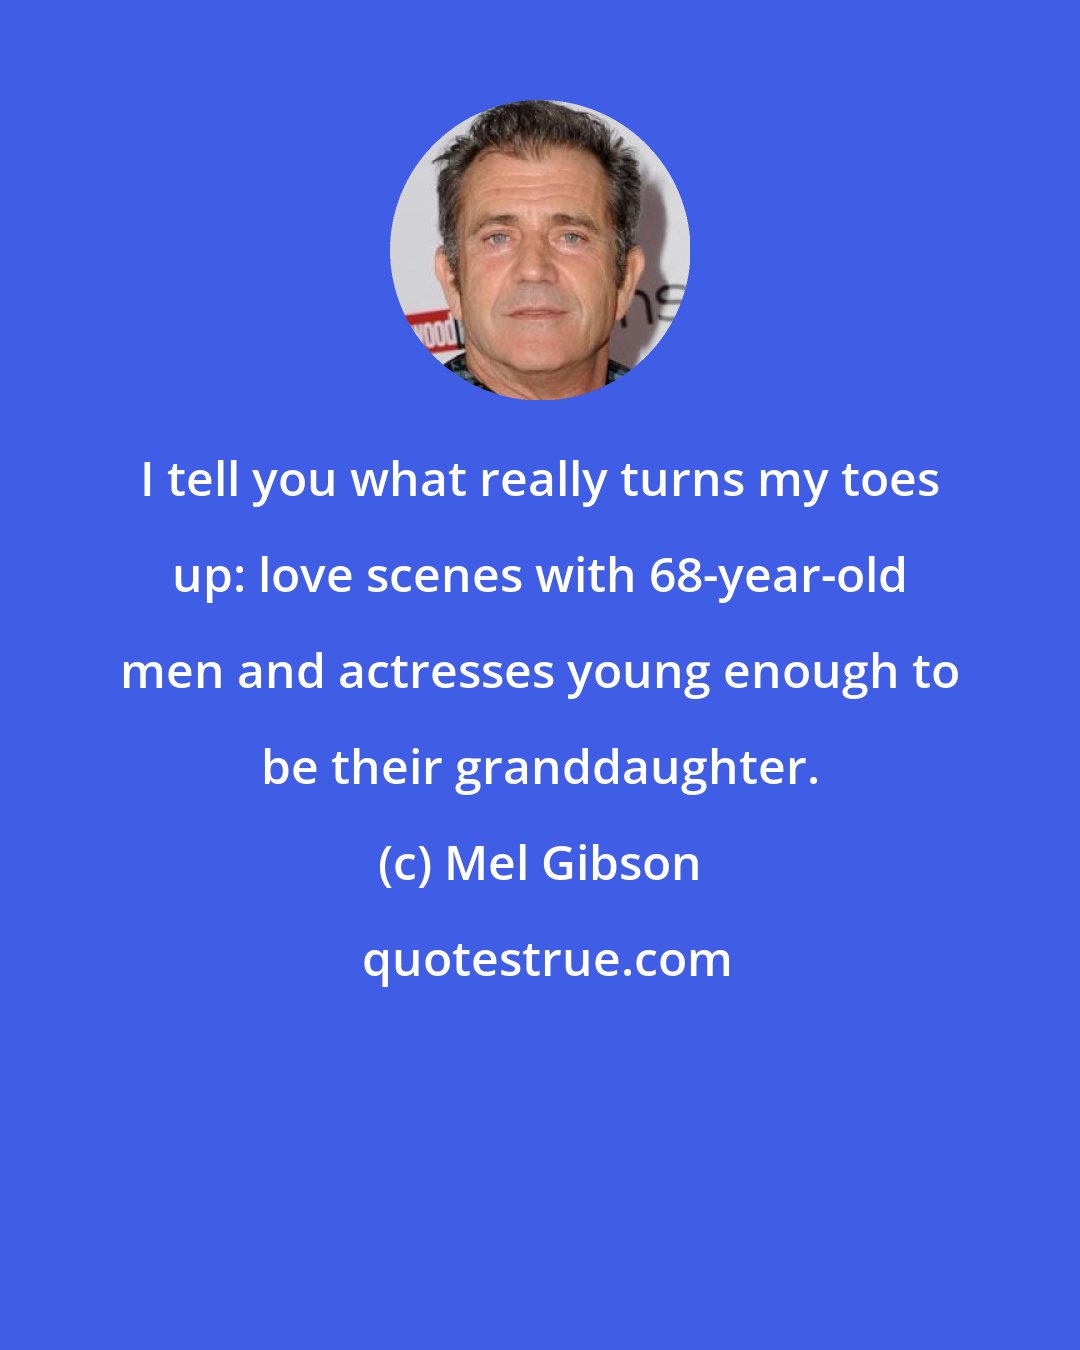 Mel Gibson: I tell you what really turns my toes up: love scenes with 68-year-old men and actresses young enough to be their granddaughter.